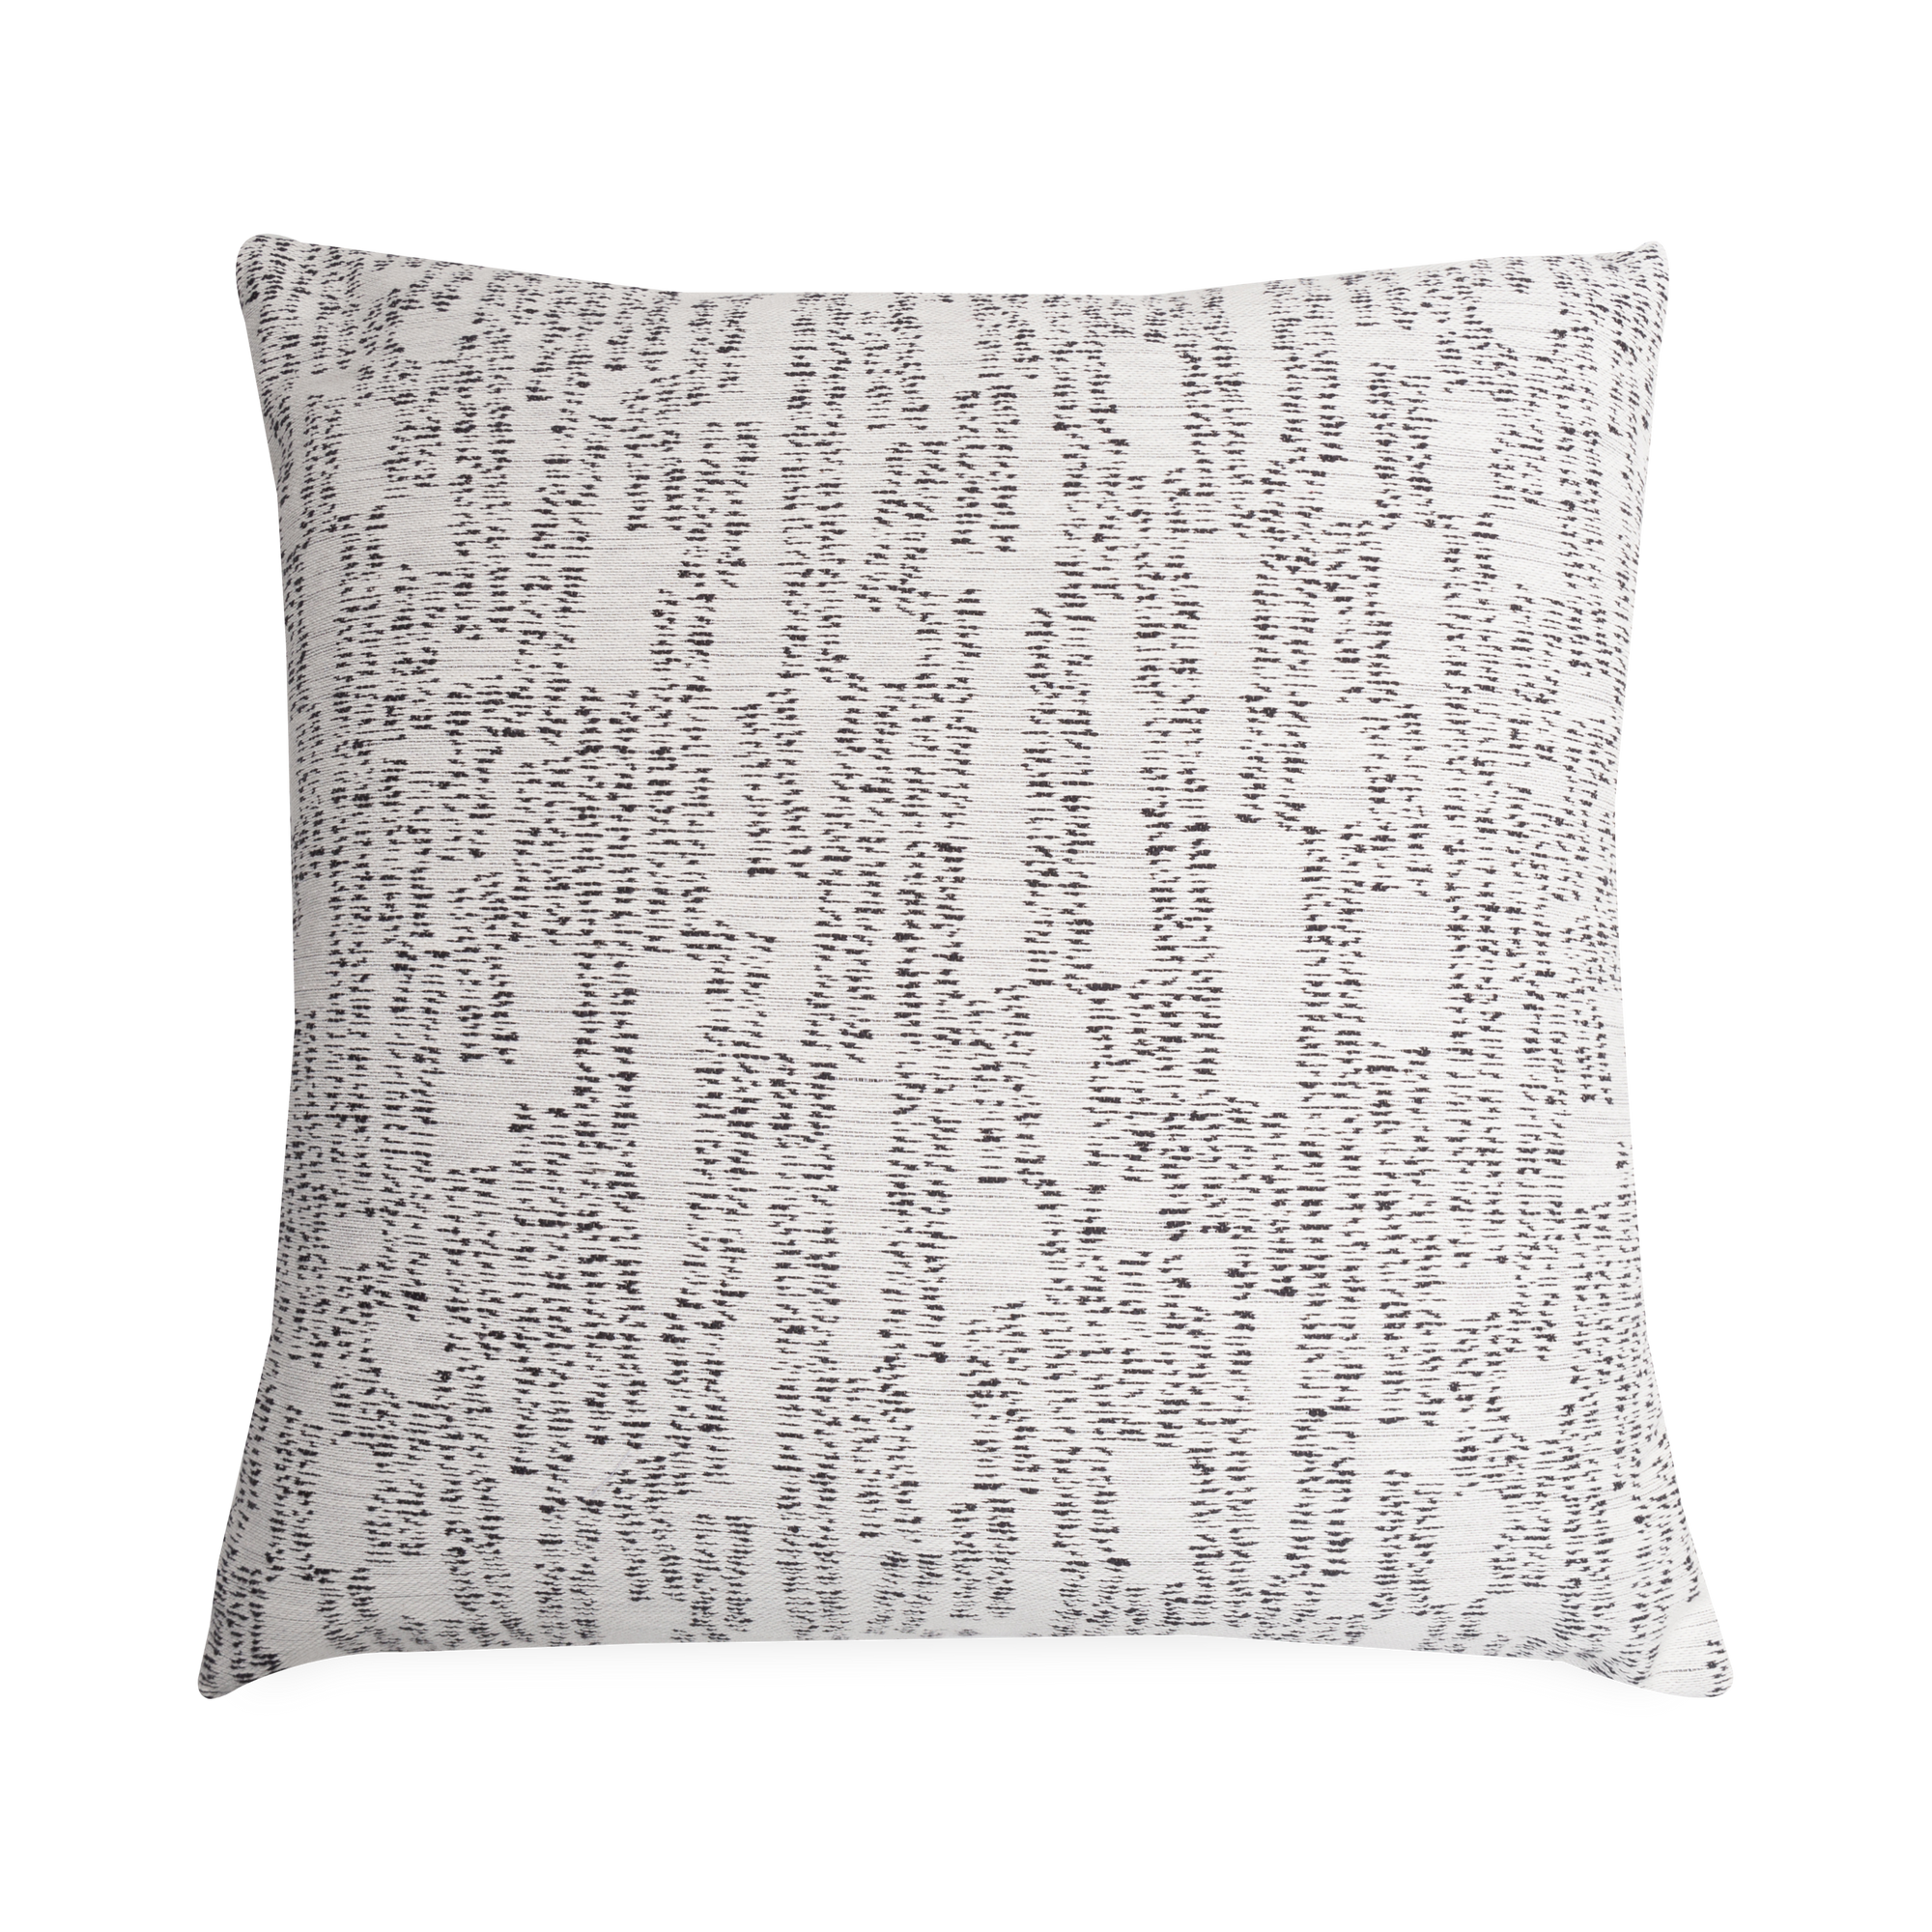 Full of visual appeal, the Morse Pillow features a sophisticated spotted design that engages your imagination.